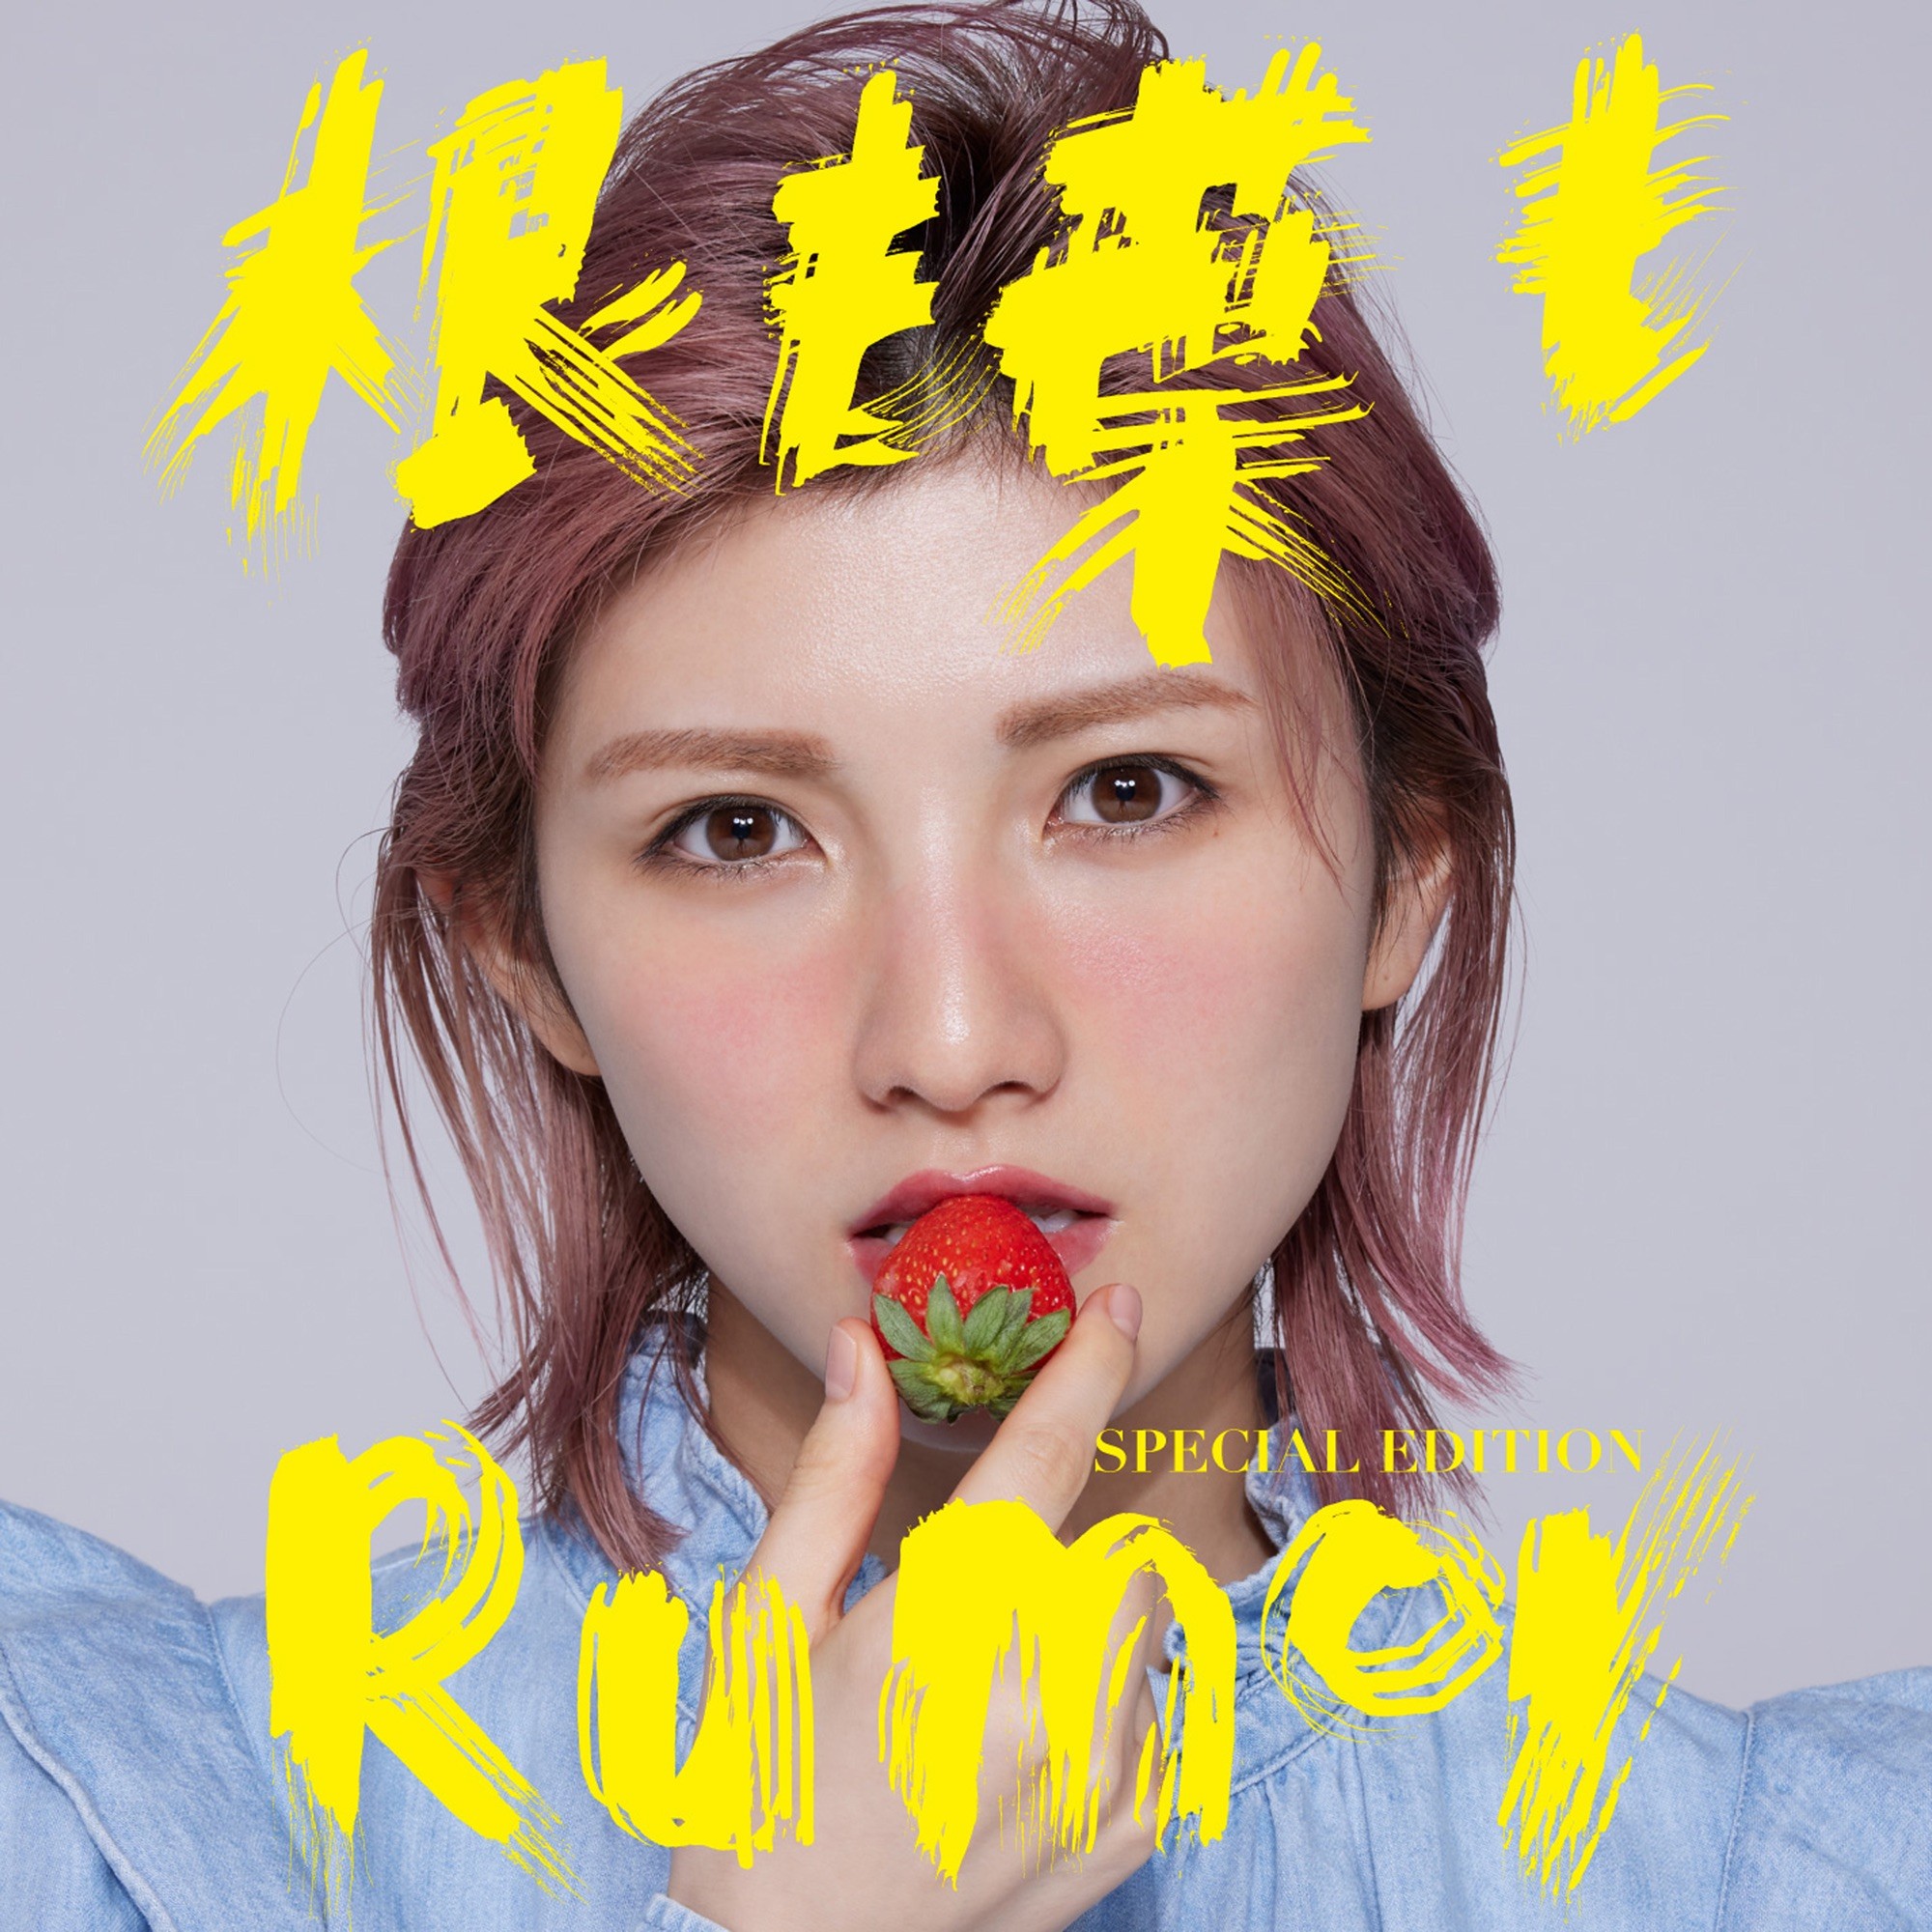 AKB48 – 根も葉もRumor (Special Edition) [FLAC 24bit/96kHz]